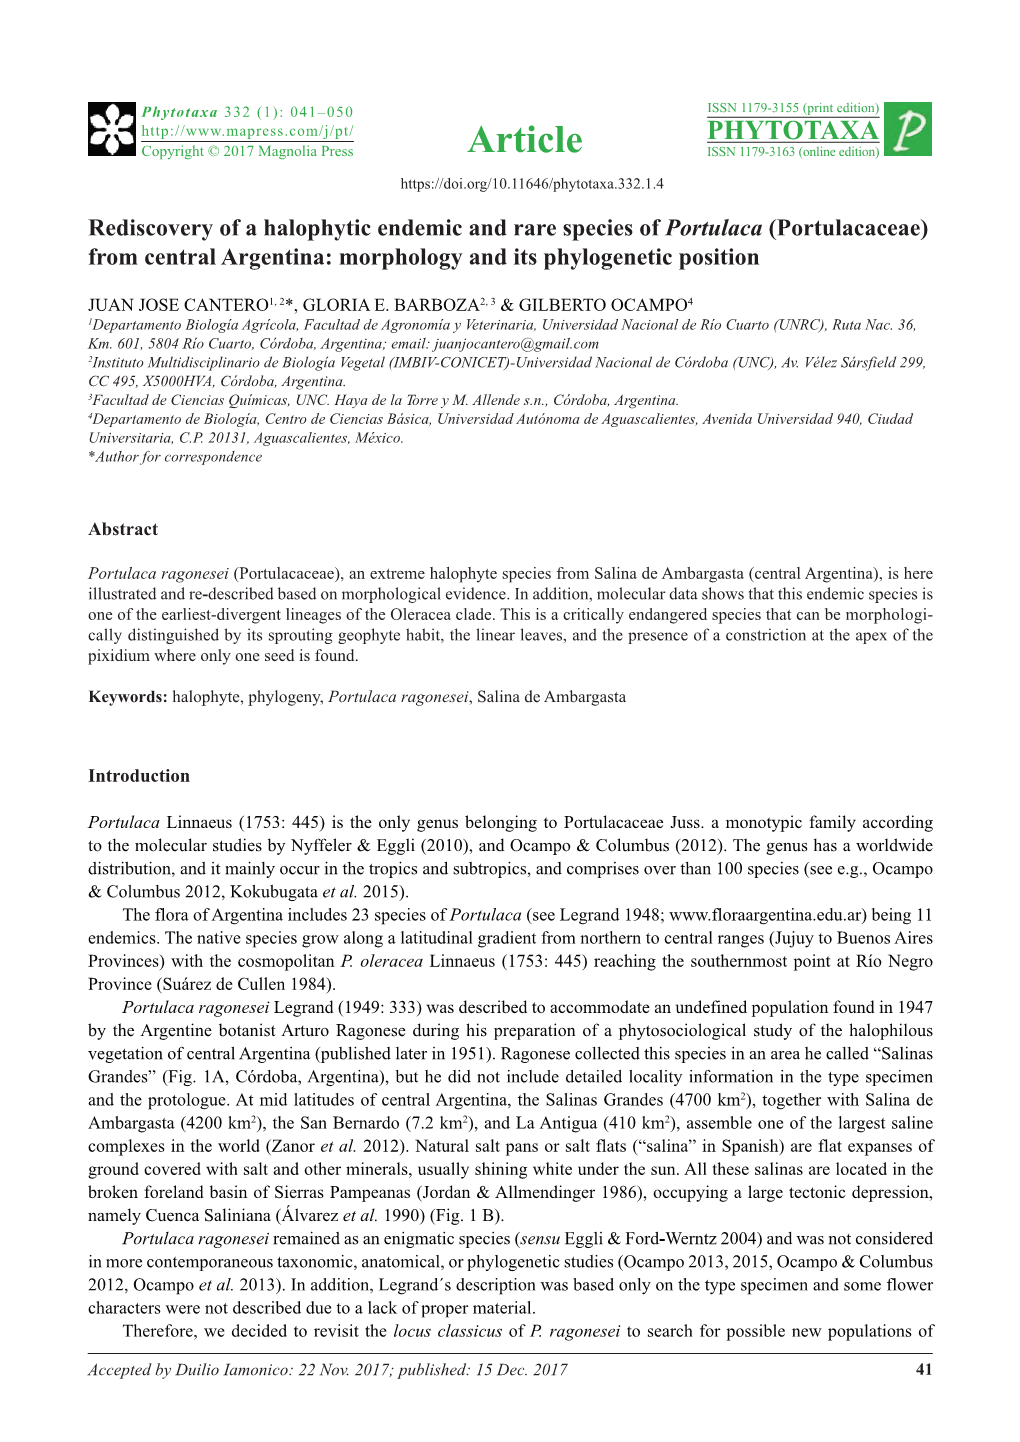 (Portulacaceae) from Central Argentina: Morphology and Its Phylogenetic Position